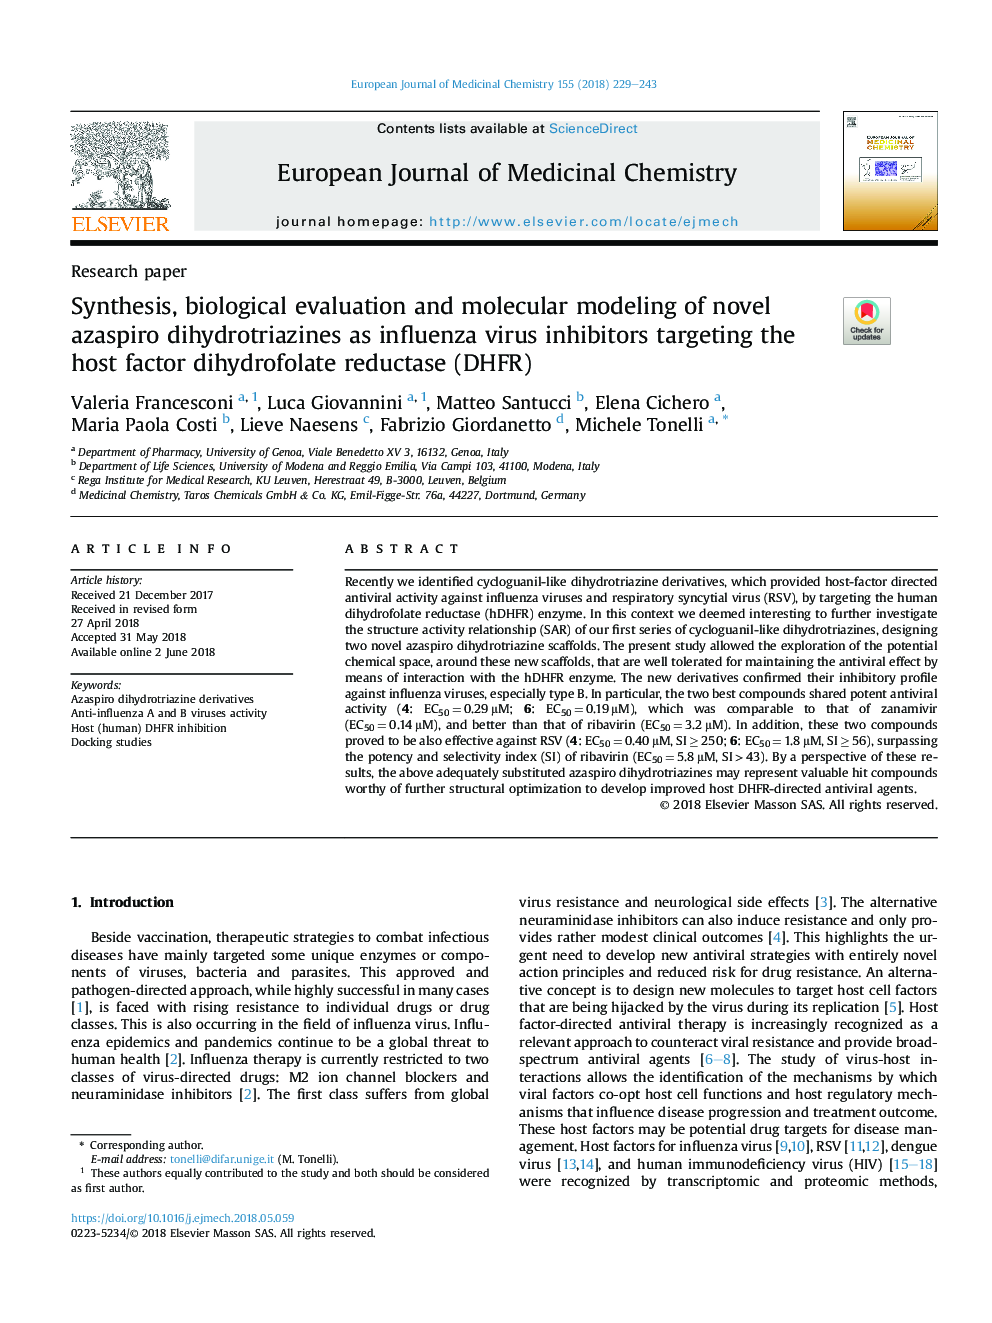 Synthesis, biological evaluation and molecular modeling of novel azaspiro dihydrotriazines as influenza virus inhibitors targeting the host factor dihydrofolate reductase (DHFR)